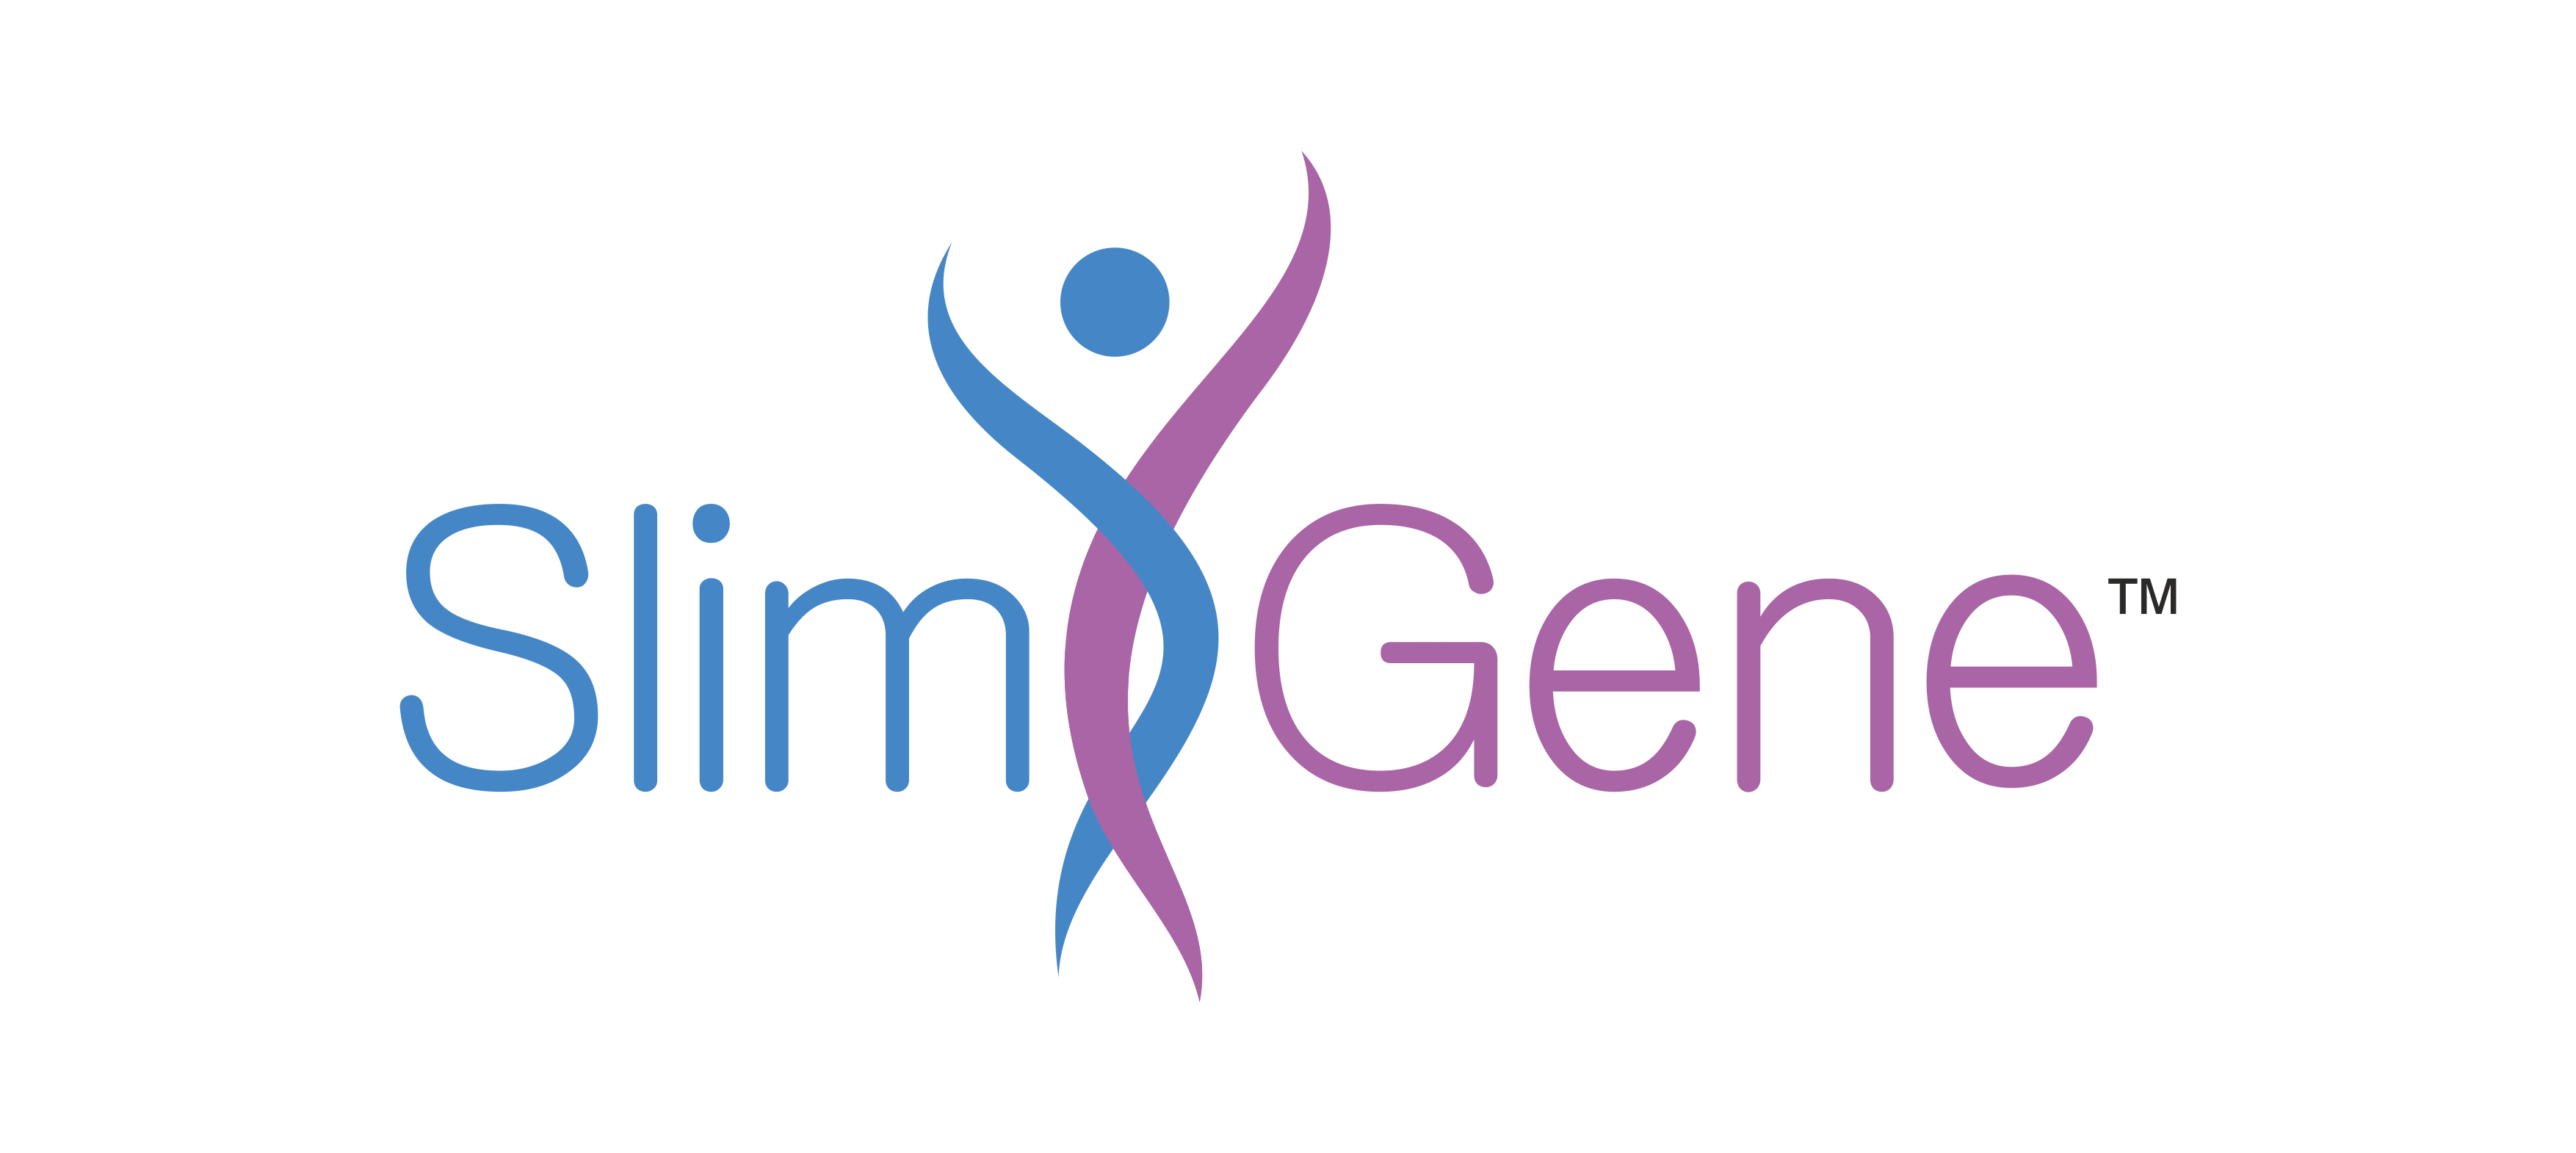 Mapmygenome India Launches SlimGene for Weight Loss